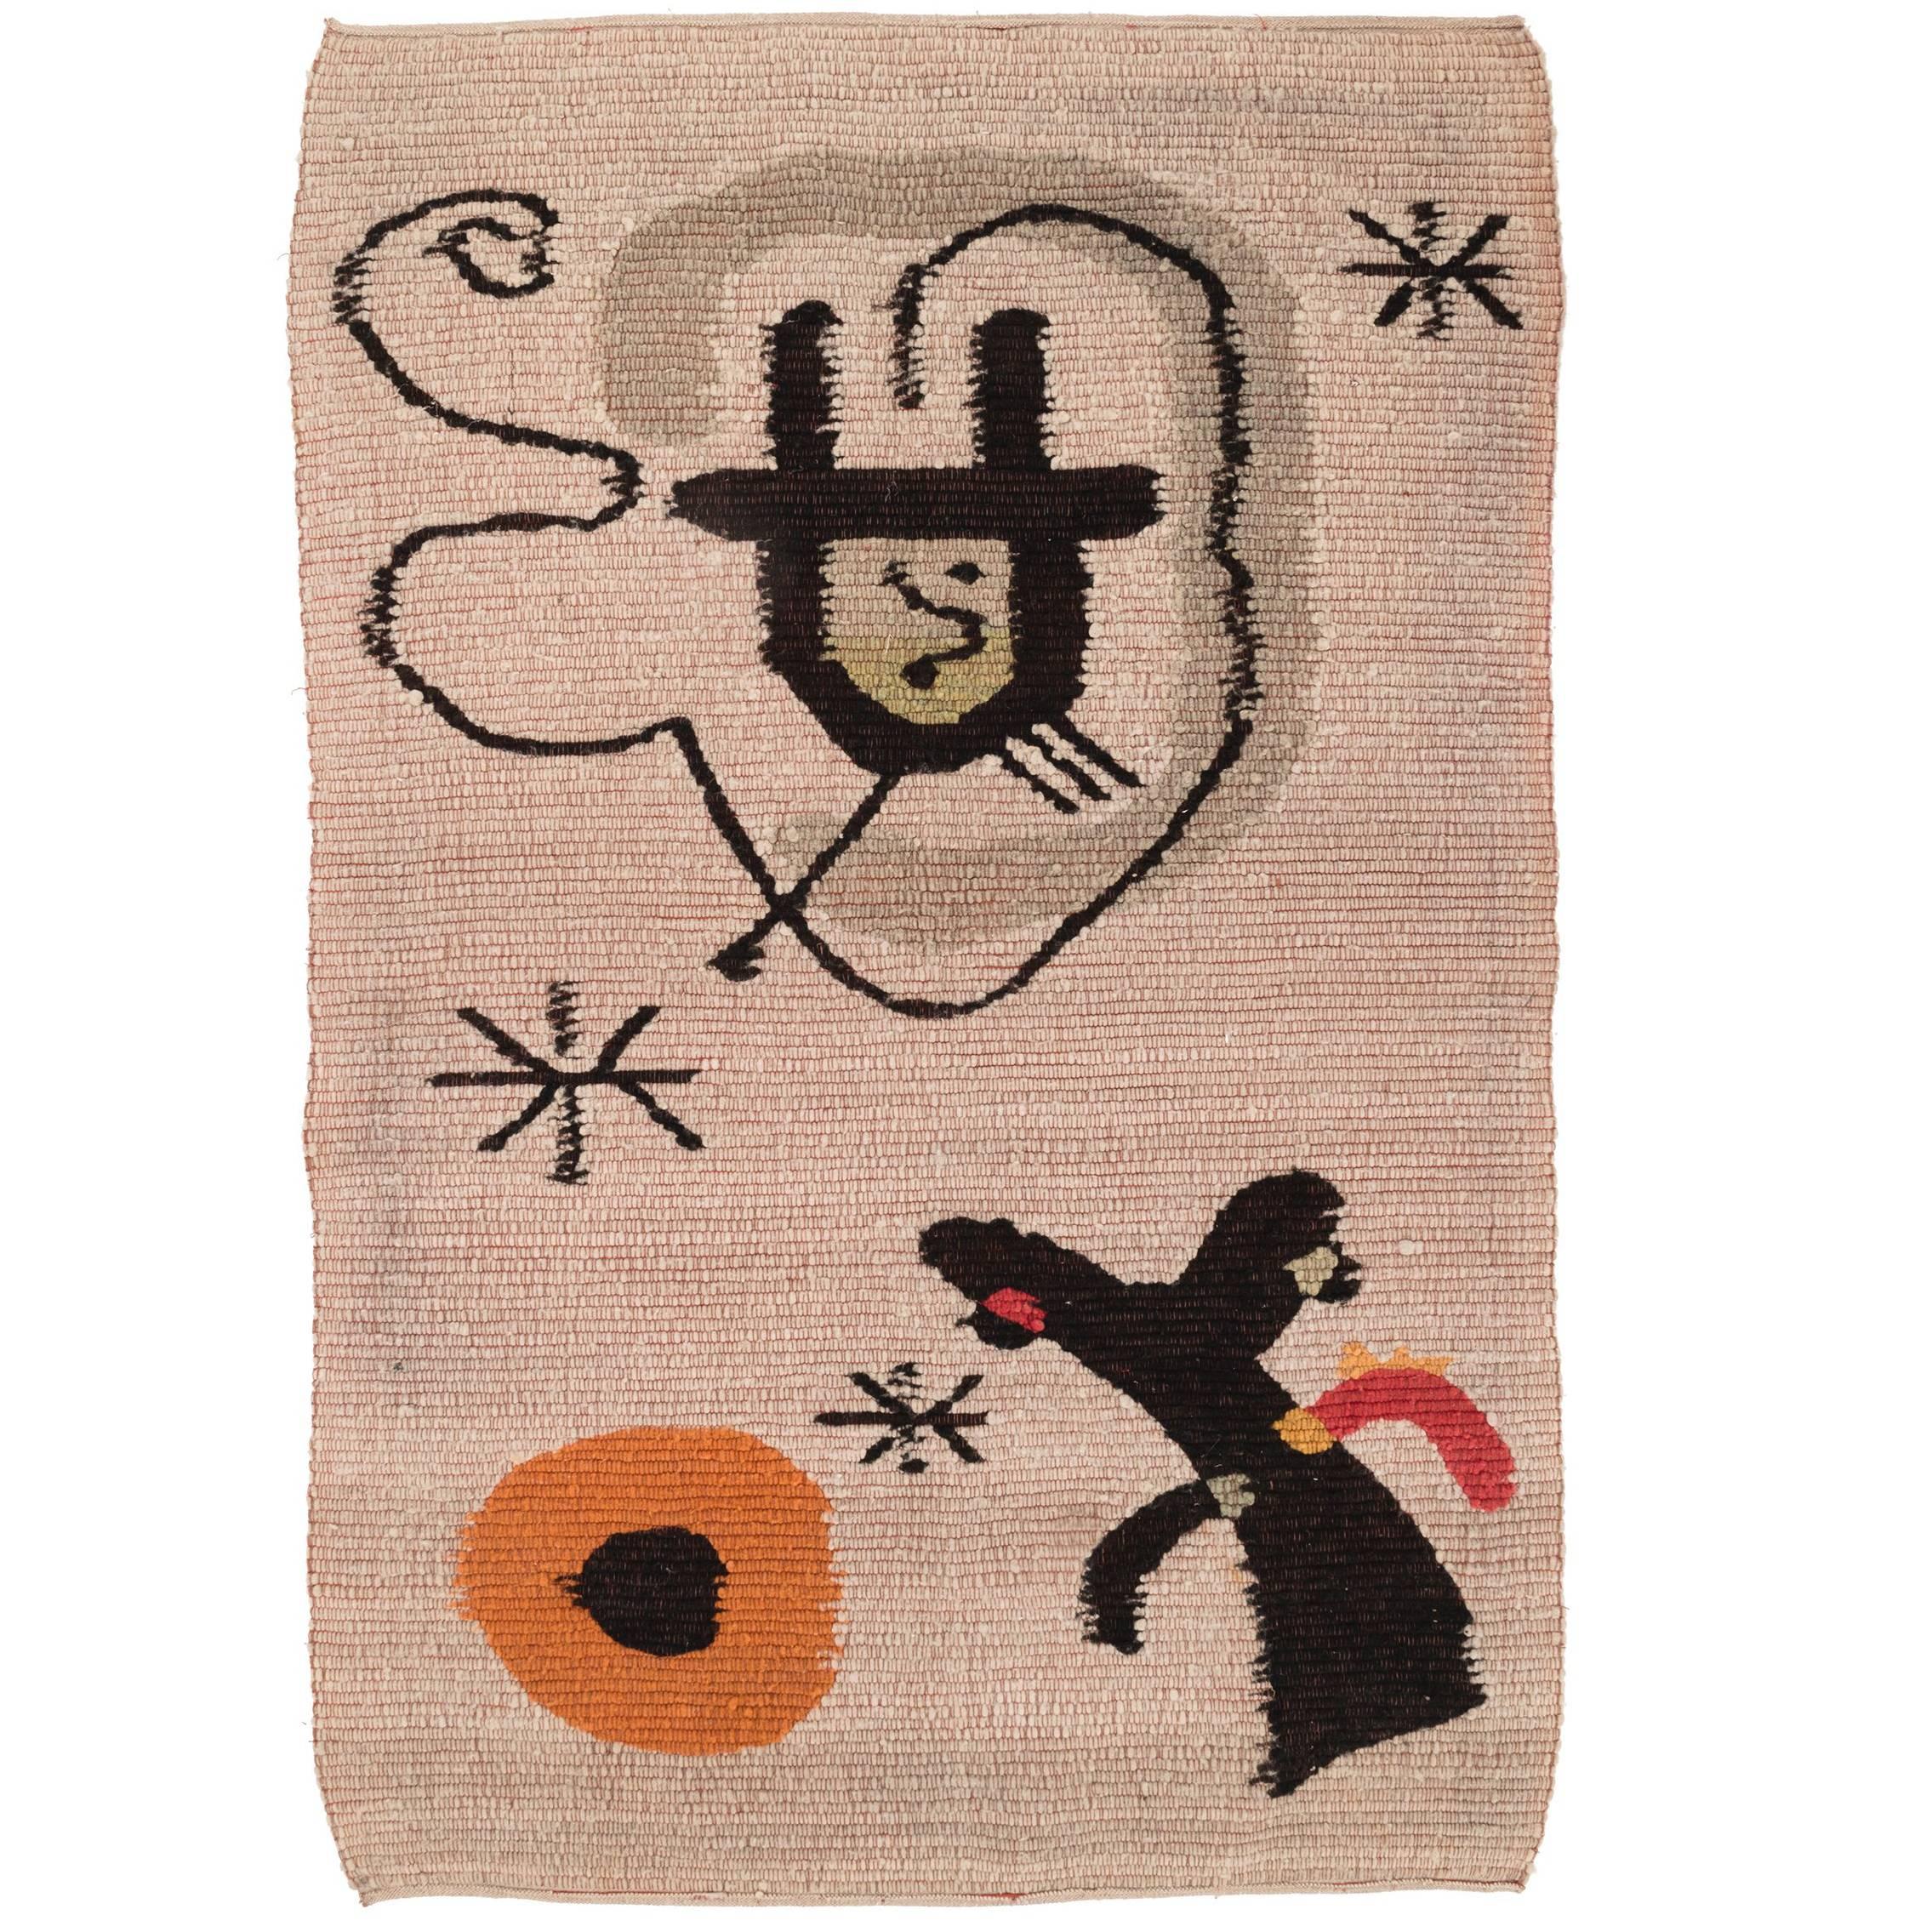 Tapestry in the style of Miro